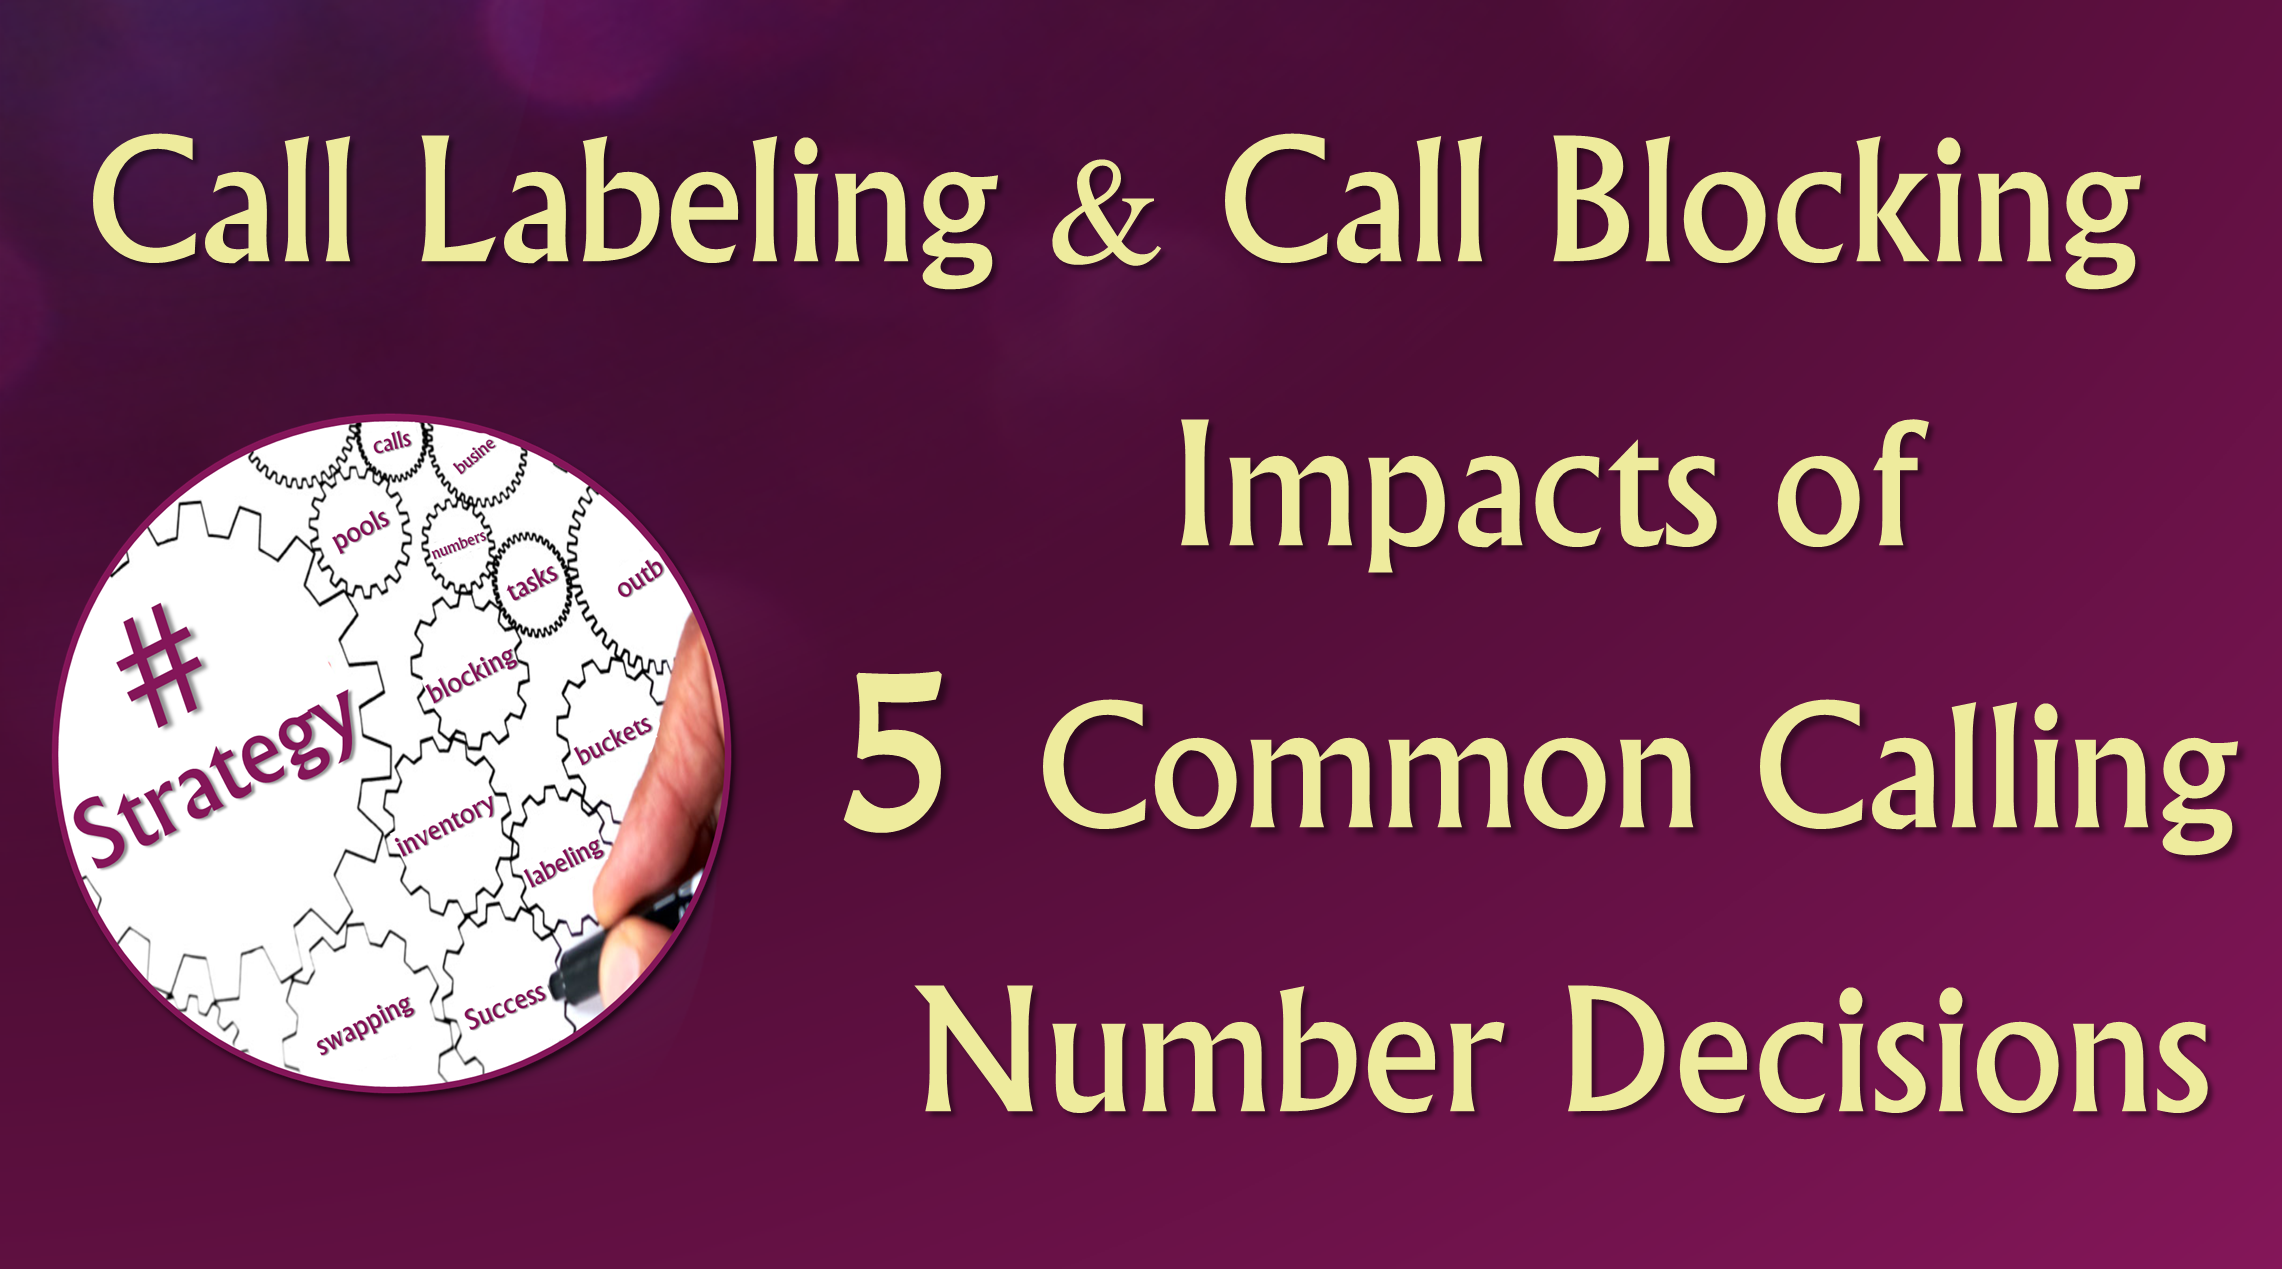 5 Common Calling Number Decisions